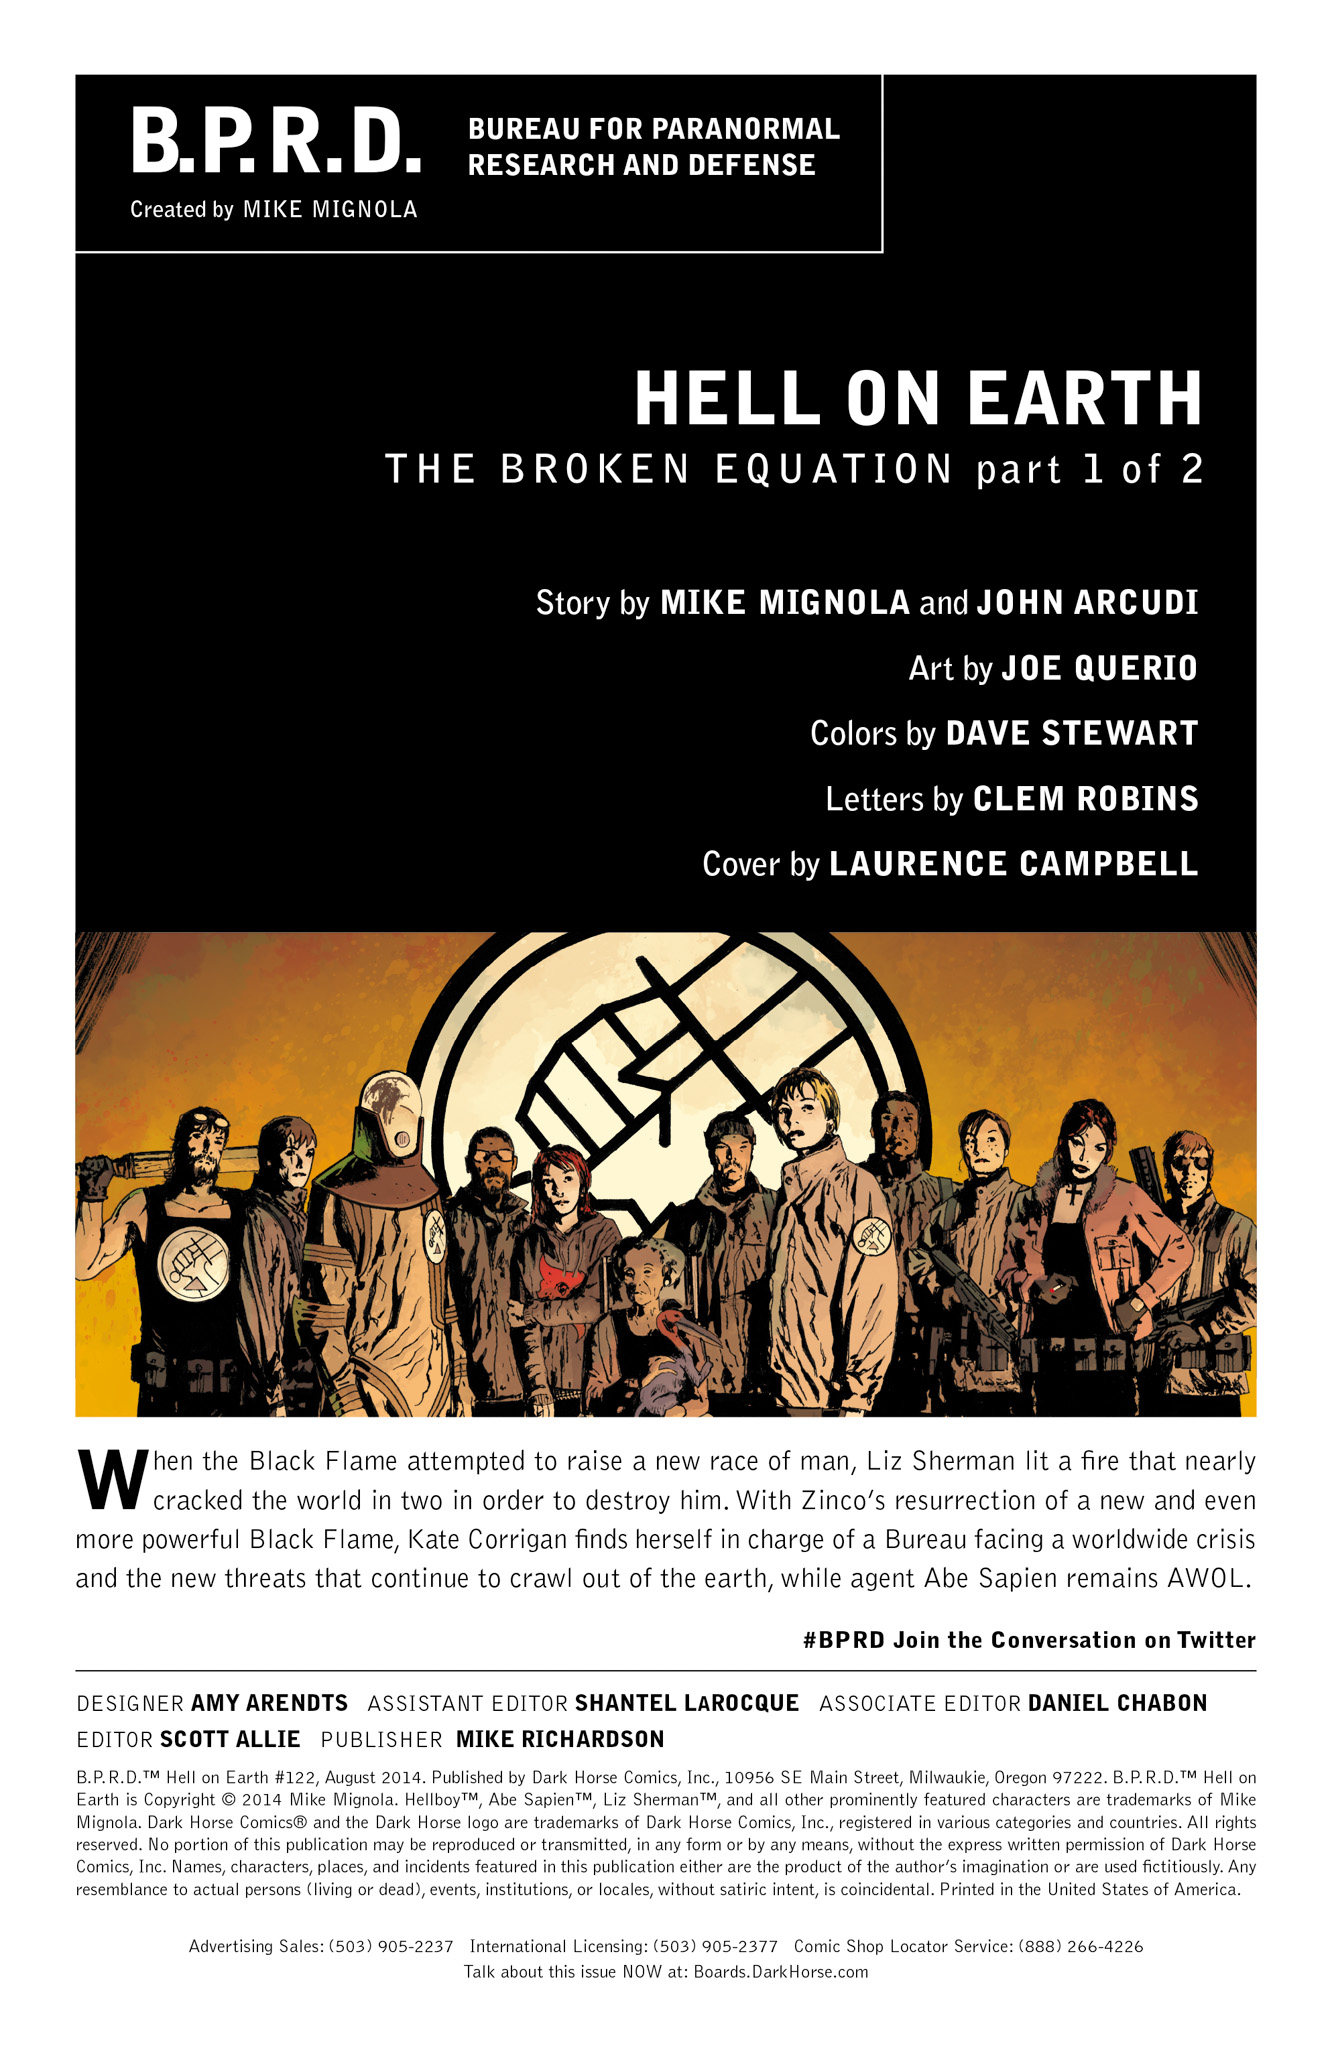 Read online B.P.R.D. Hell on Earth comic -  Issue #122 - 2